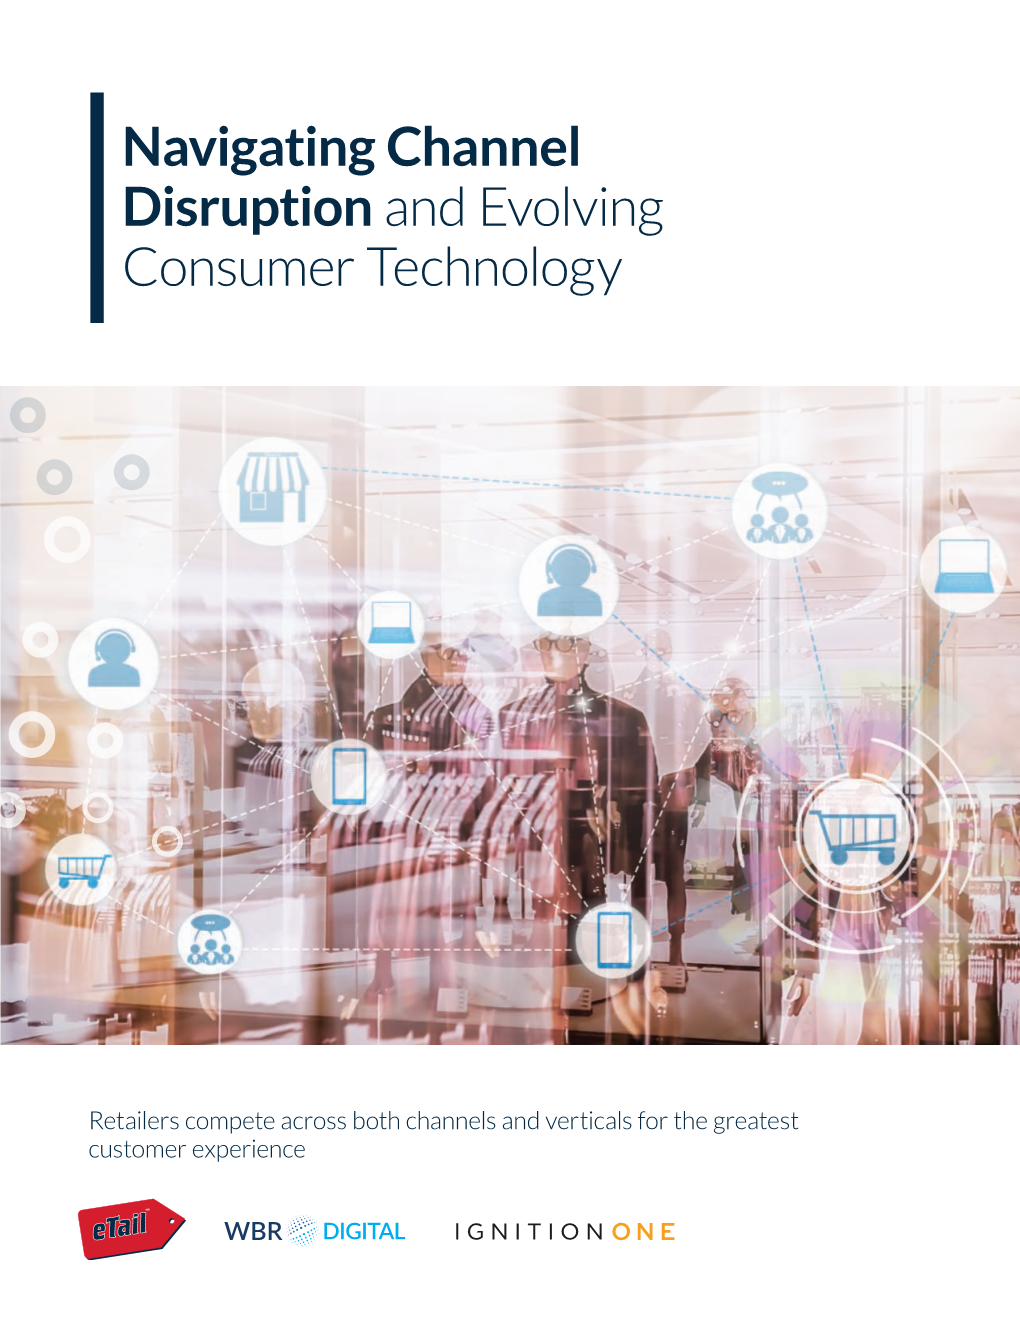 Navigating Channel Disruption and Evolving Consumer Technology